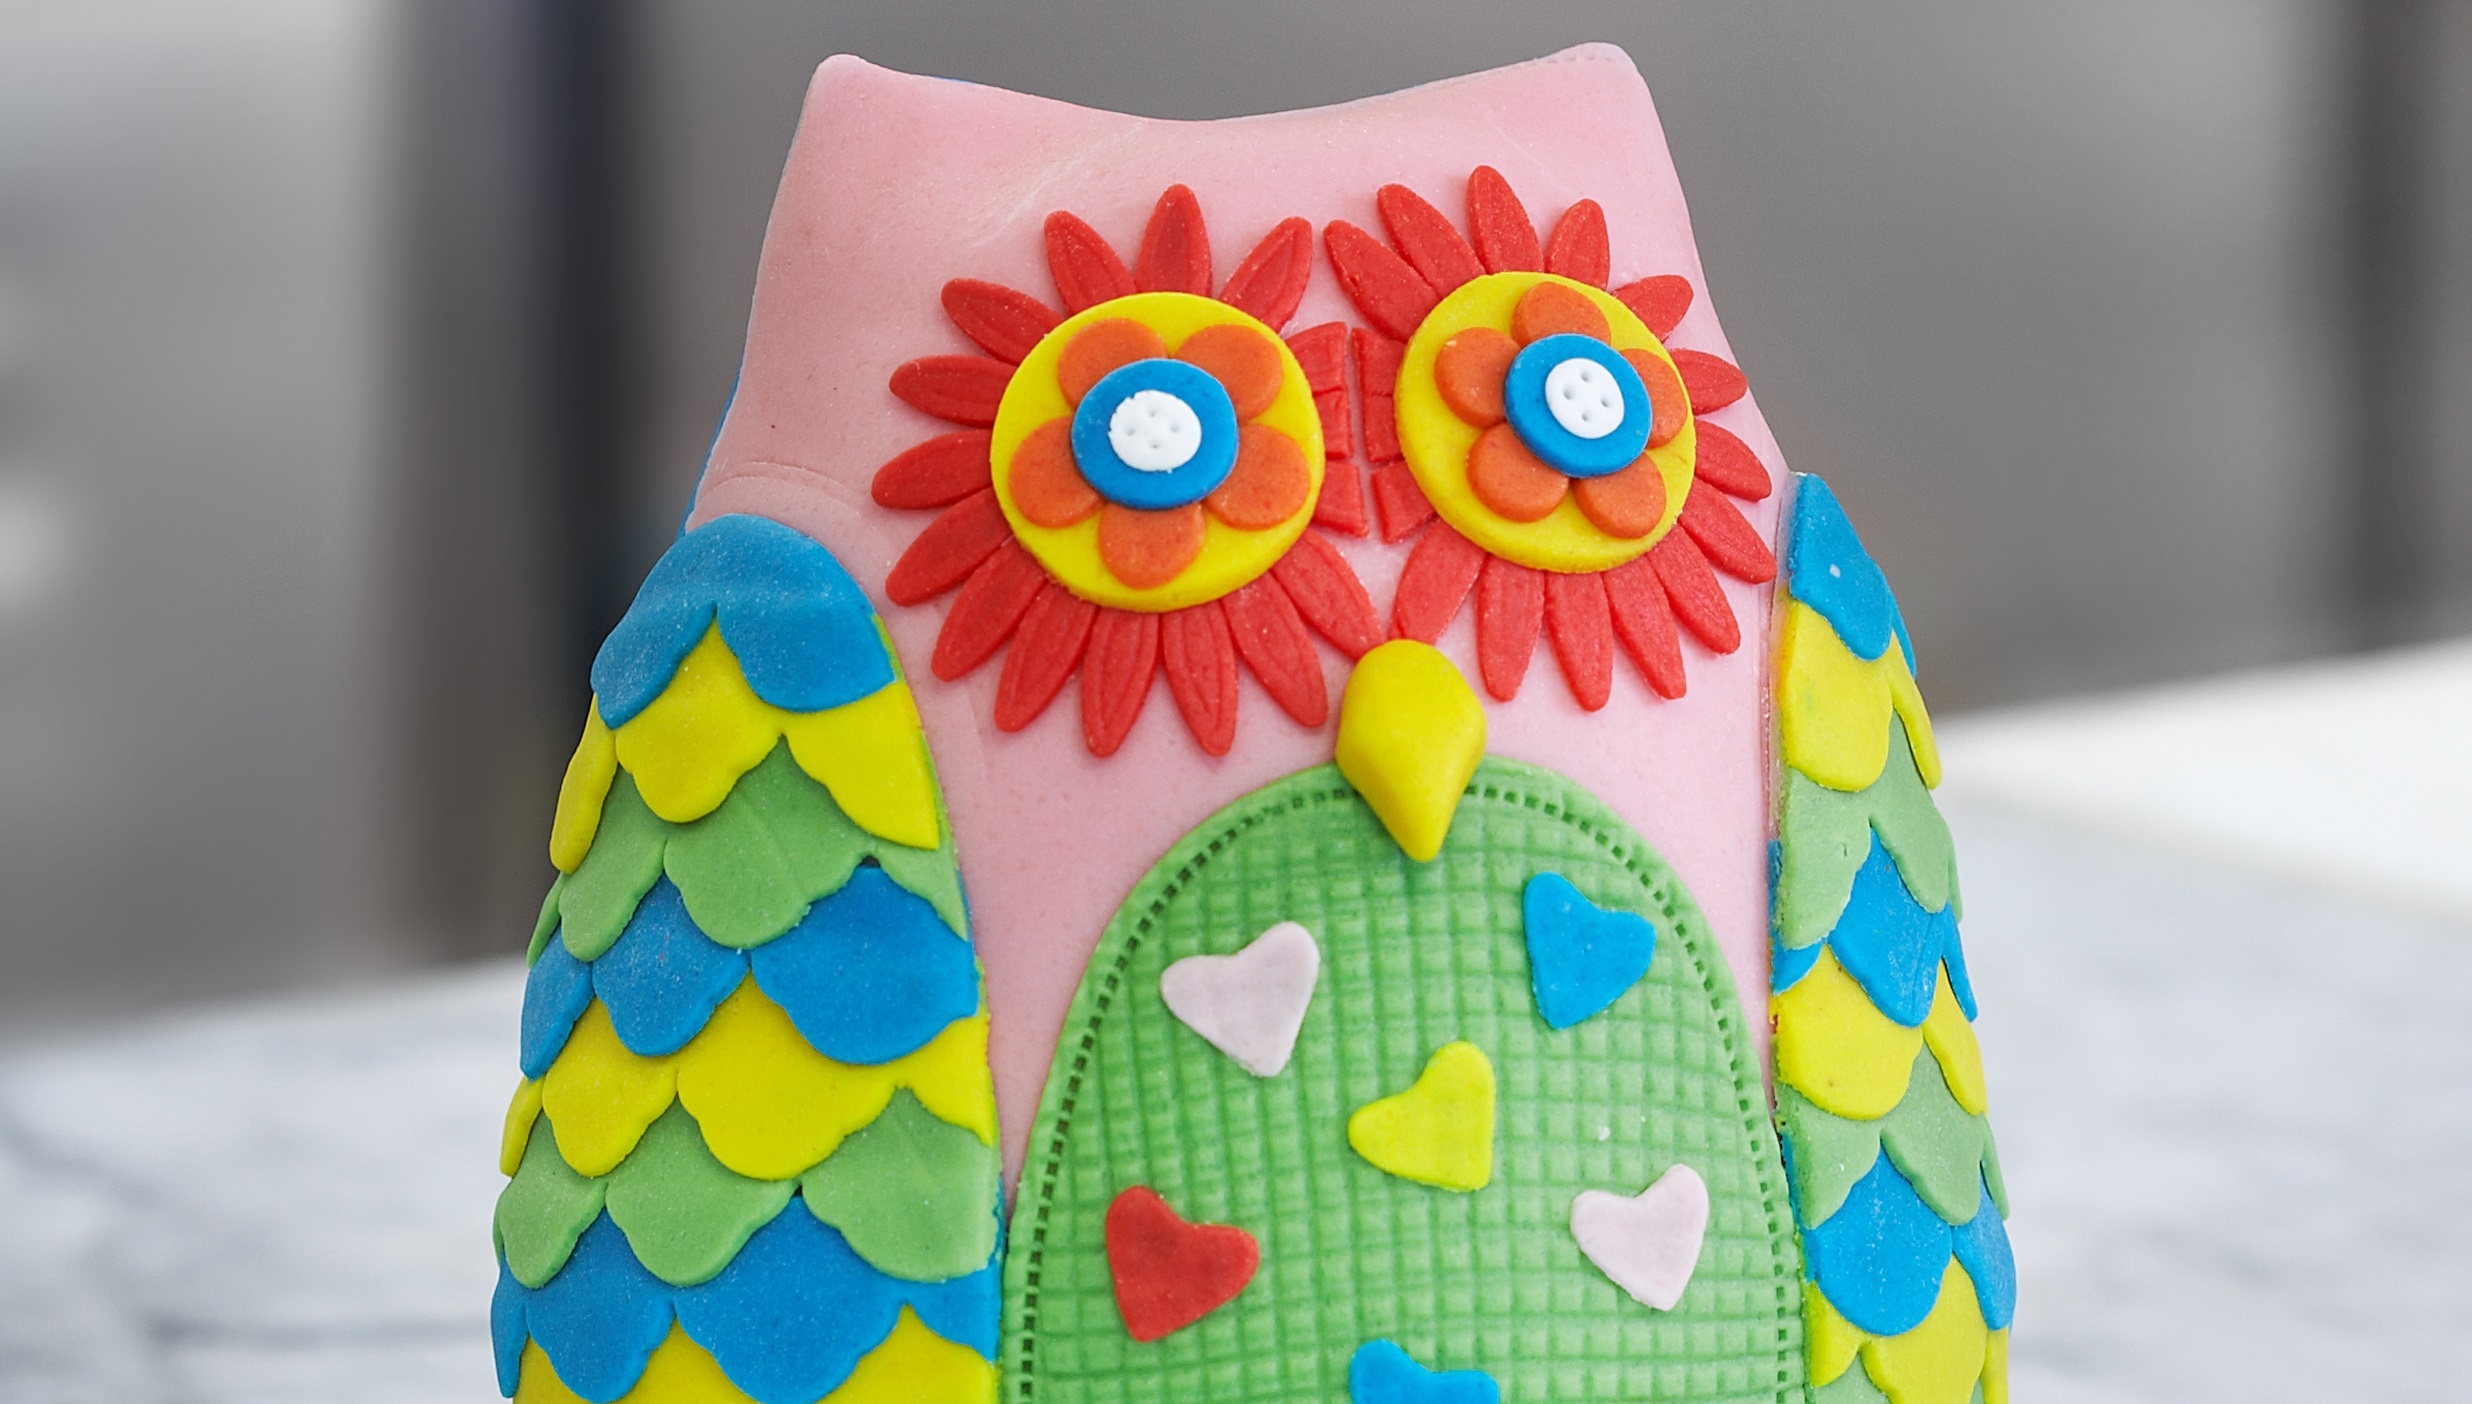 How to decorate an Owl Cake